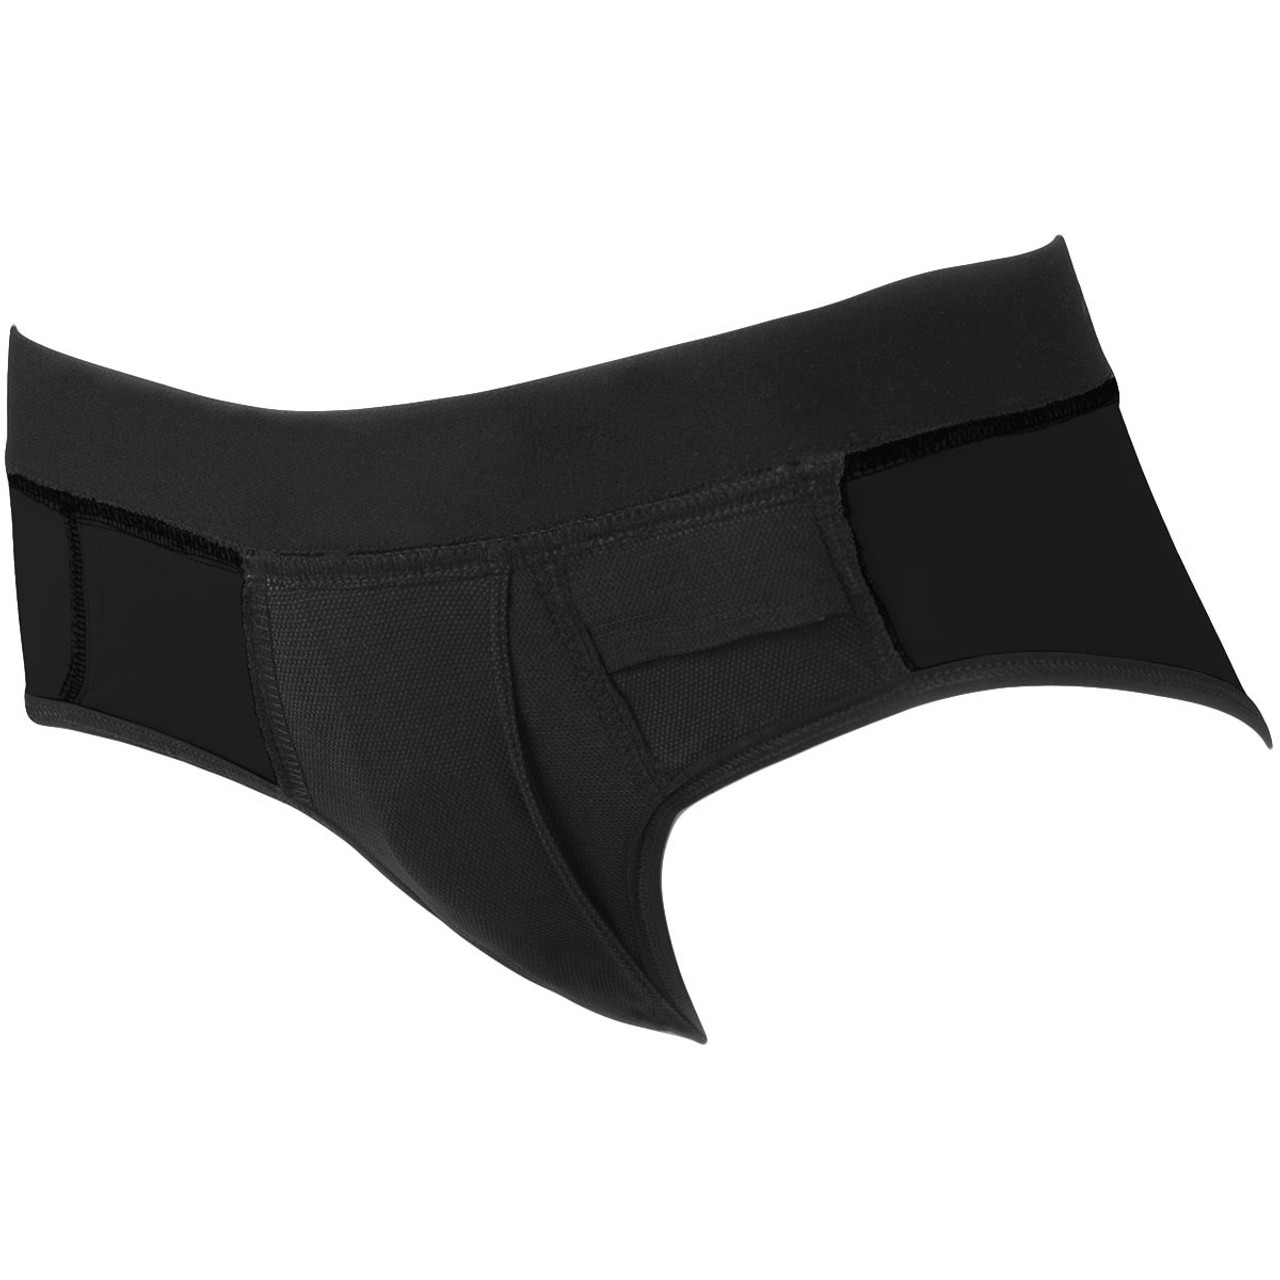 Hernia Support Underwear, Select Orders Ship Free!